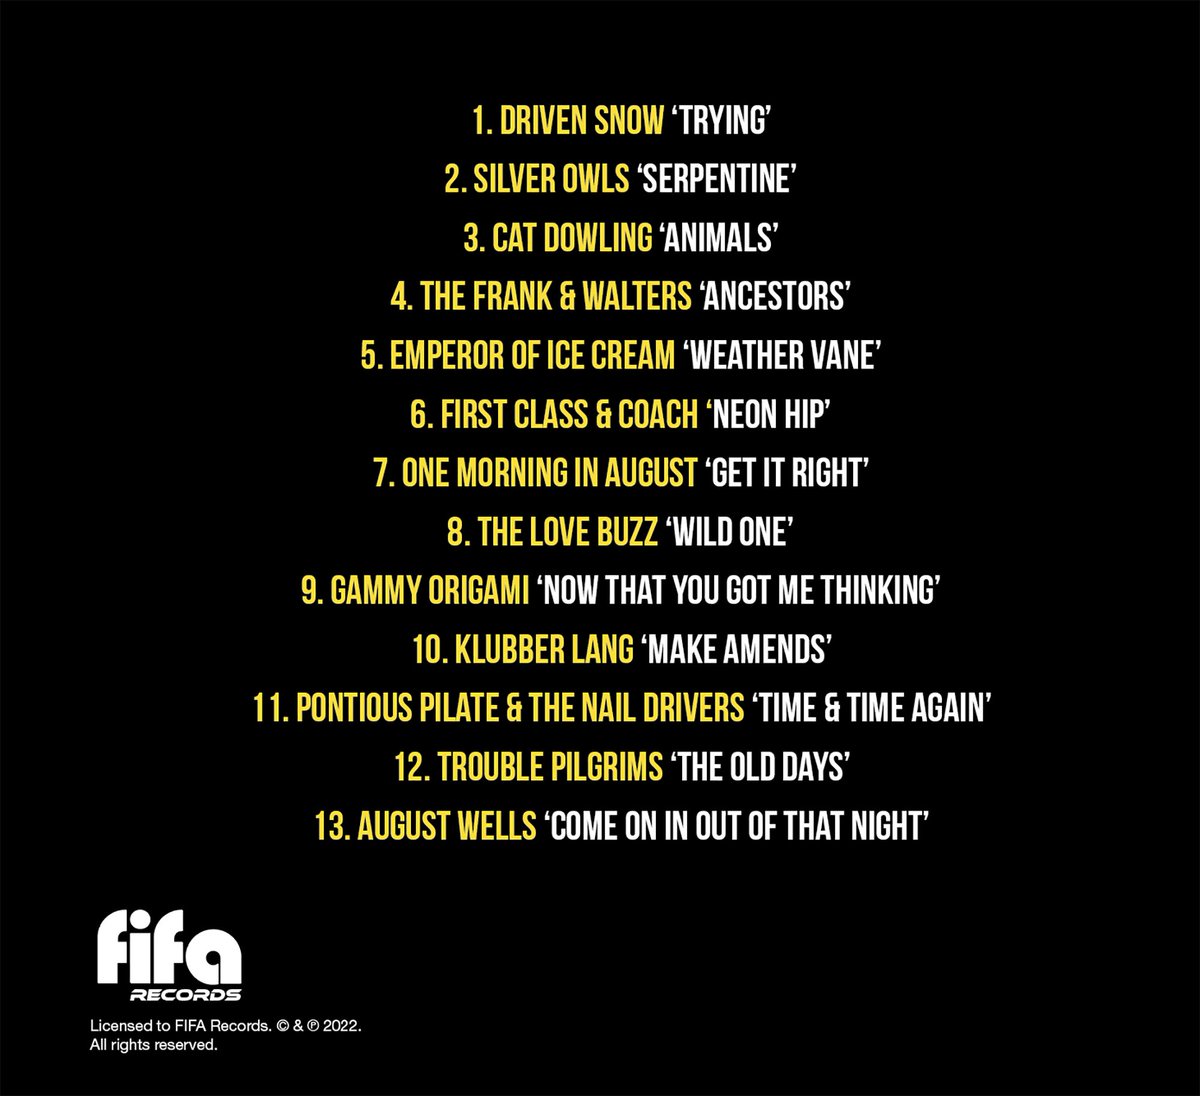 Tomorrow is bandcamp Fri folks, loads of music & merch from FIFA artists available. Go grab some @OneMorninAugust @TheLoveBuzz1 @TheEmperorsCork @FirstAndCoach @catdowlingmusic @TroublePilgrims @thenaildrivers @DrivenSnowMusic @KlubberM here ⬇️⬇️⬇️ fifarecords.bandcamp.com